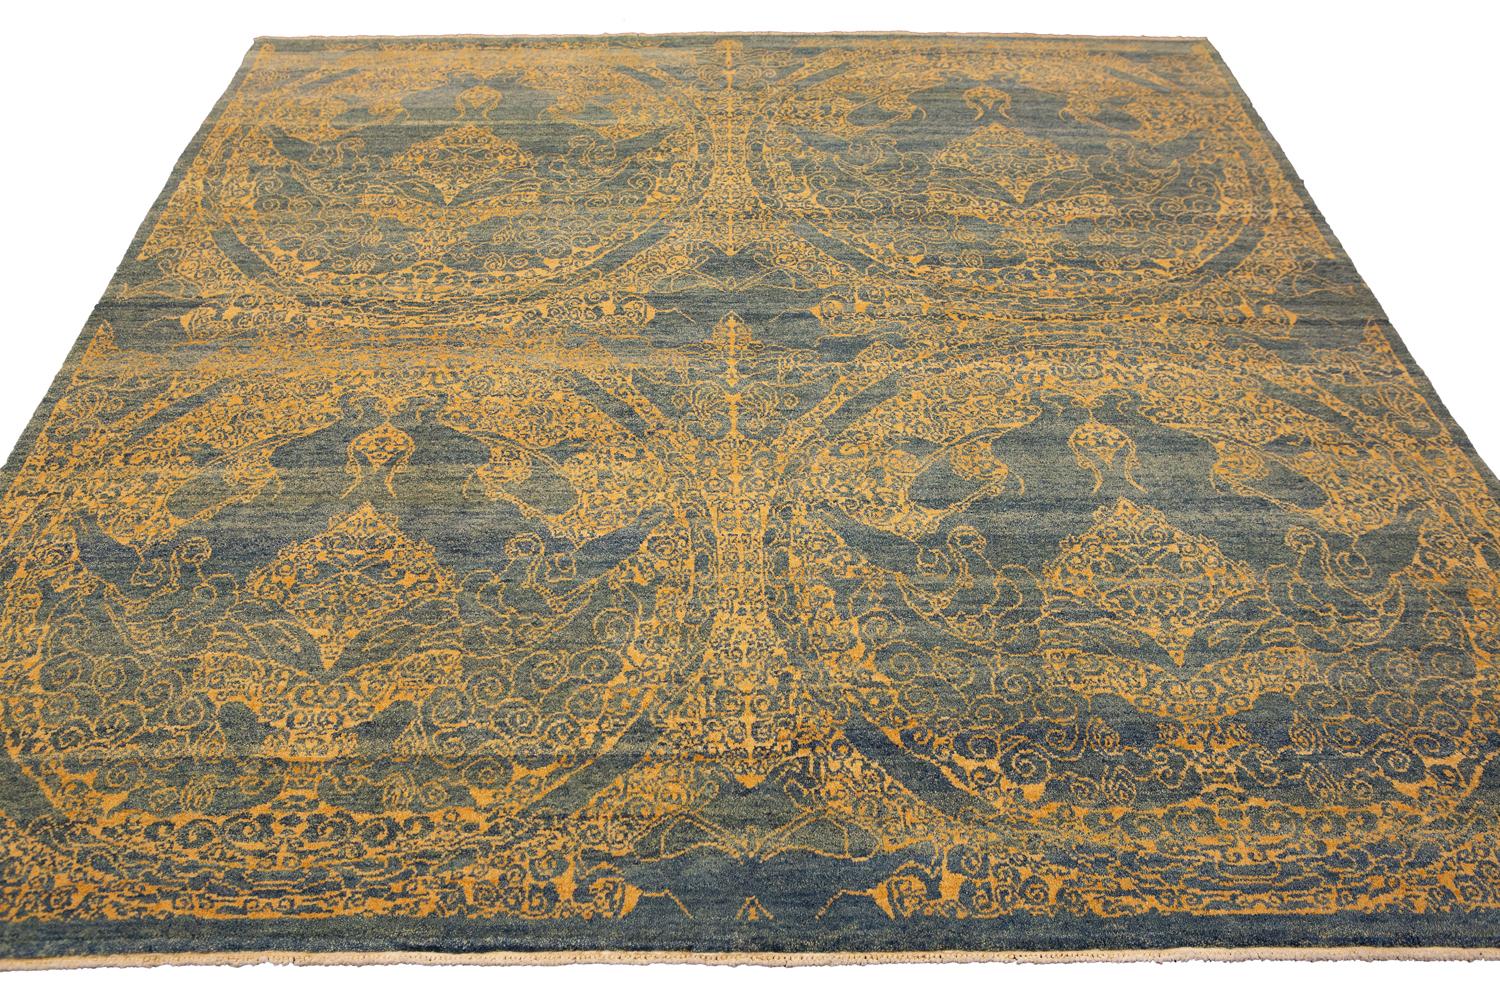 This one-of-a-kind etno Yadan rug is sure to make a statement in any space. Hand-knotted with a bold, modern design, this rug is perfect for adding a touch of luxury to your home. Made from high-quality materials, this rug is built to last and will